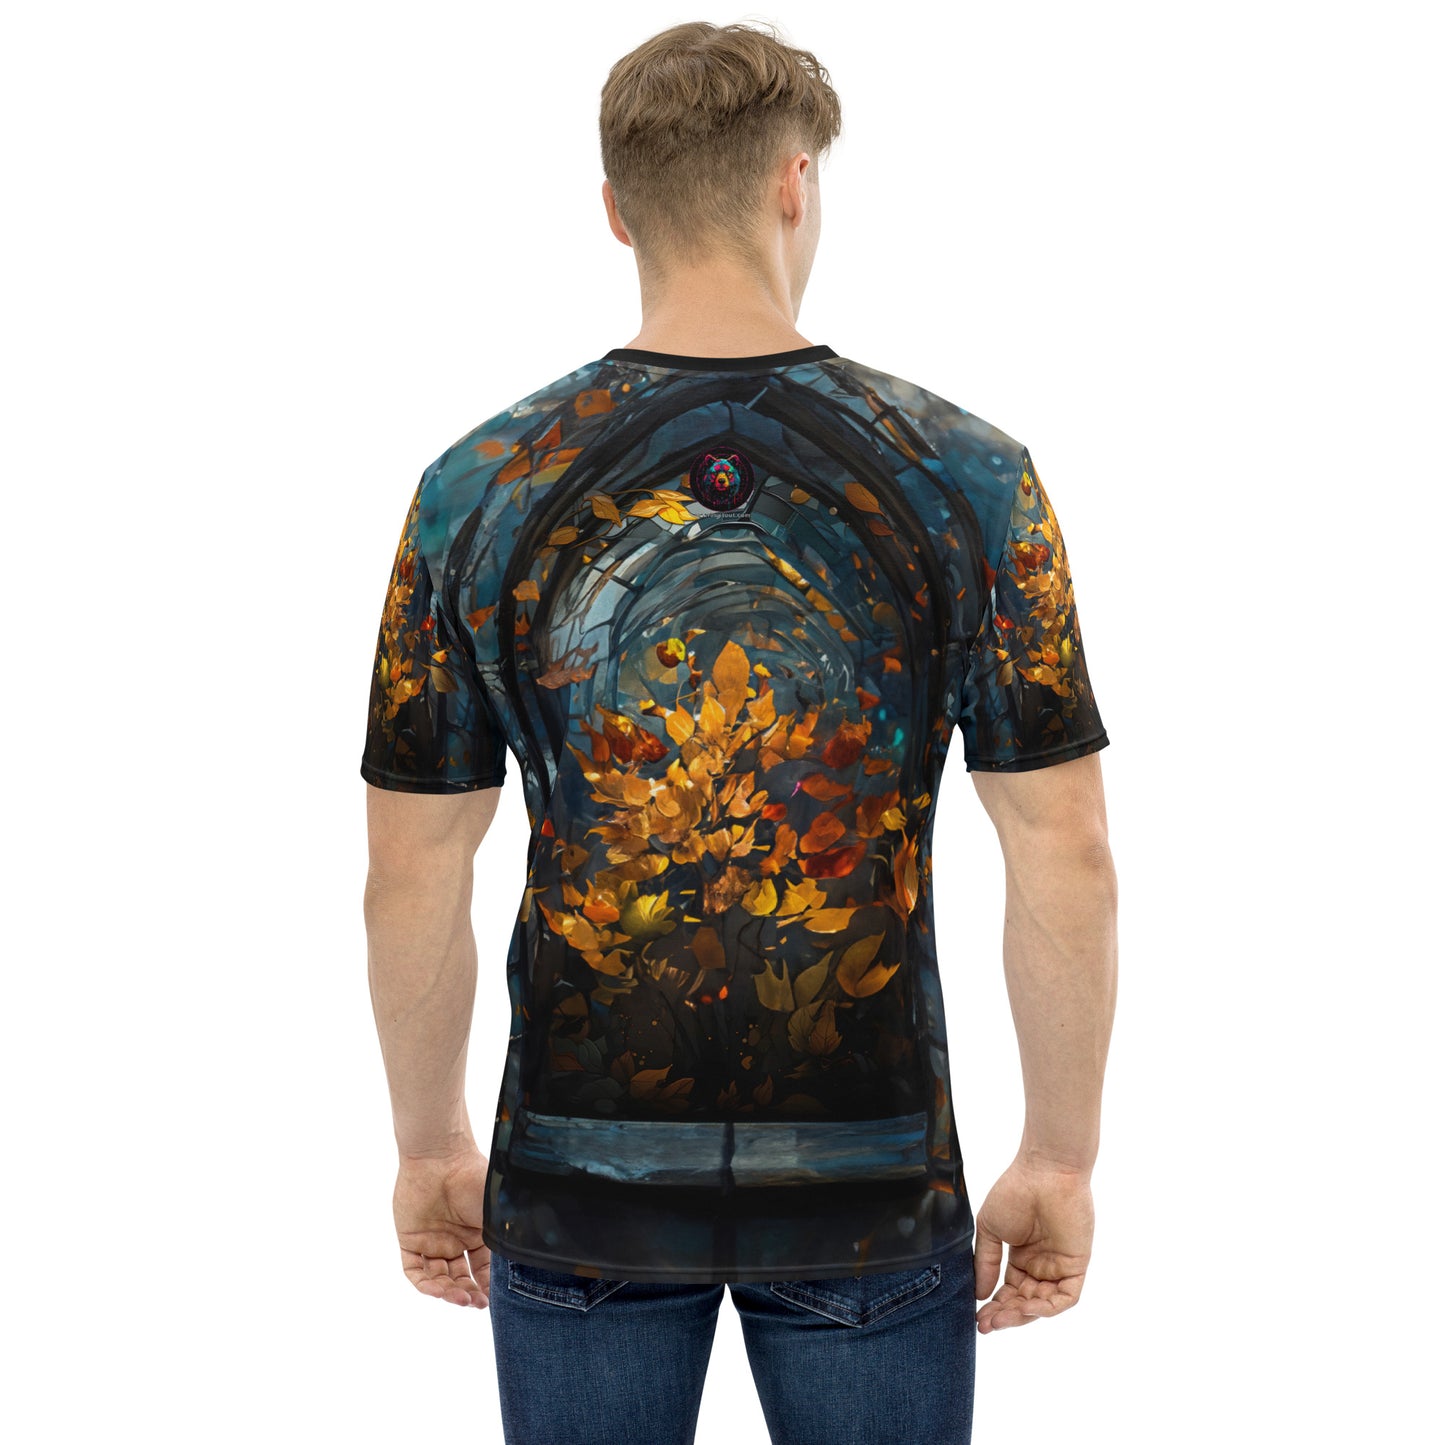 Stained Glass Bear All Over Print Men's T-Shirt